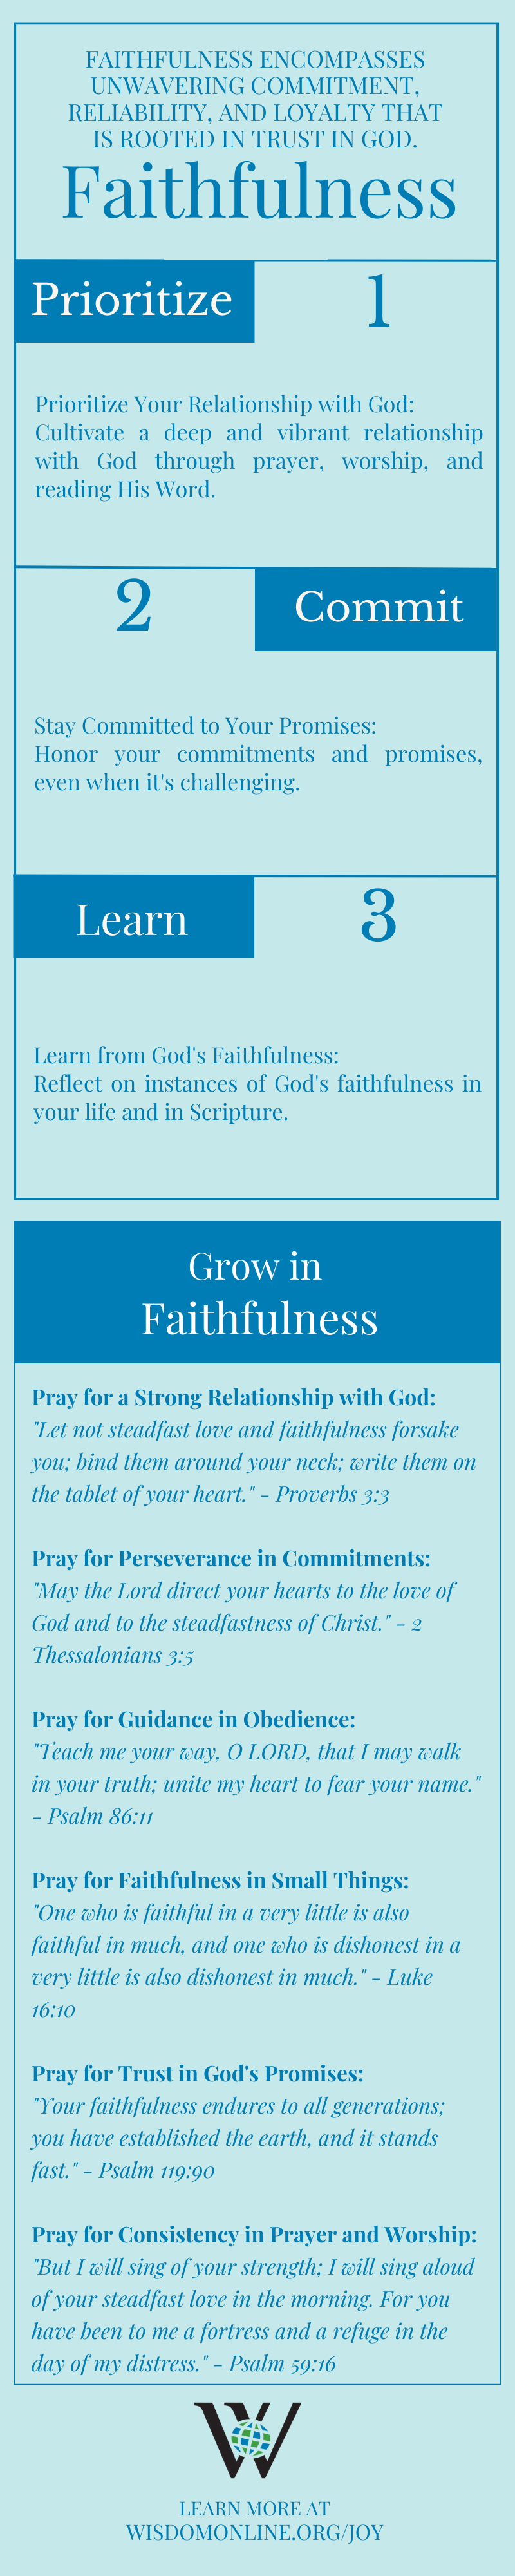 Infographic on the Biblical characteristic of faithfulness